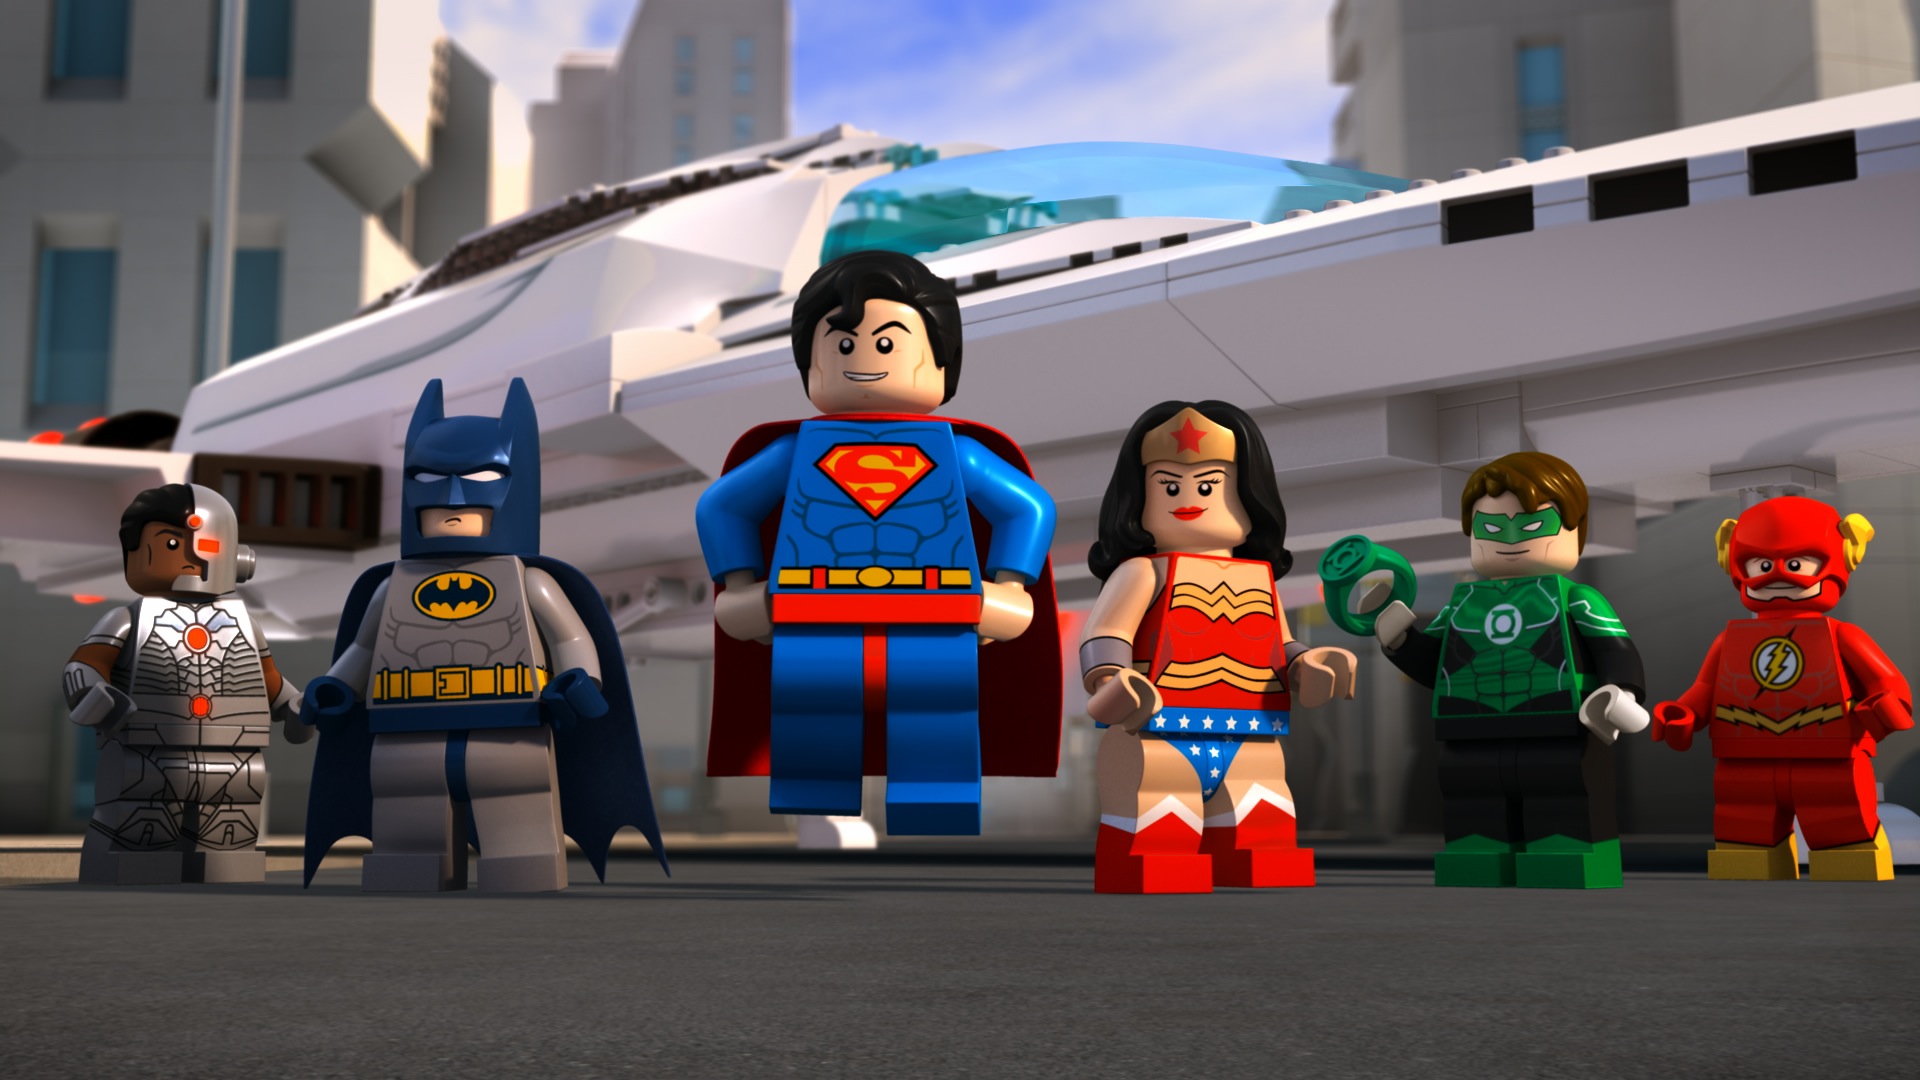 High Resolution Wallpaper | LEGO DC Super Heroes: Justice League - Attack Of The Legion Of Doom! 1920x1080 px